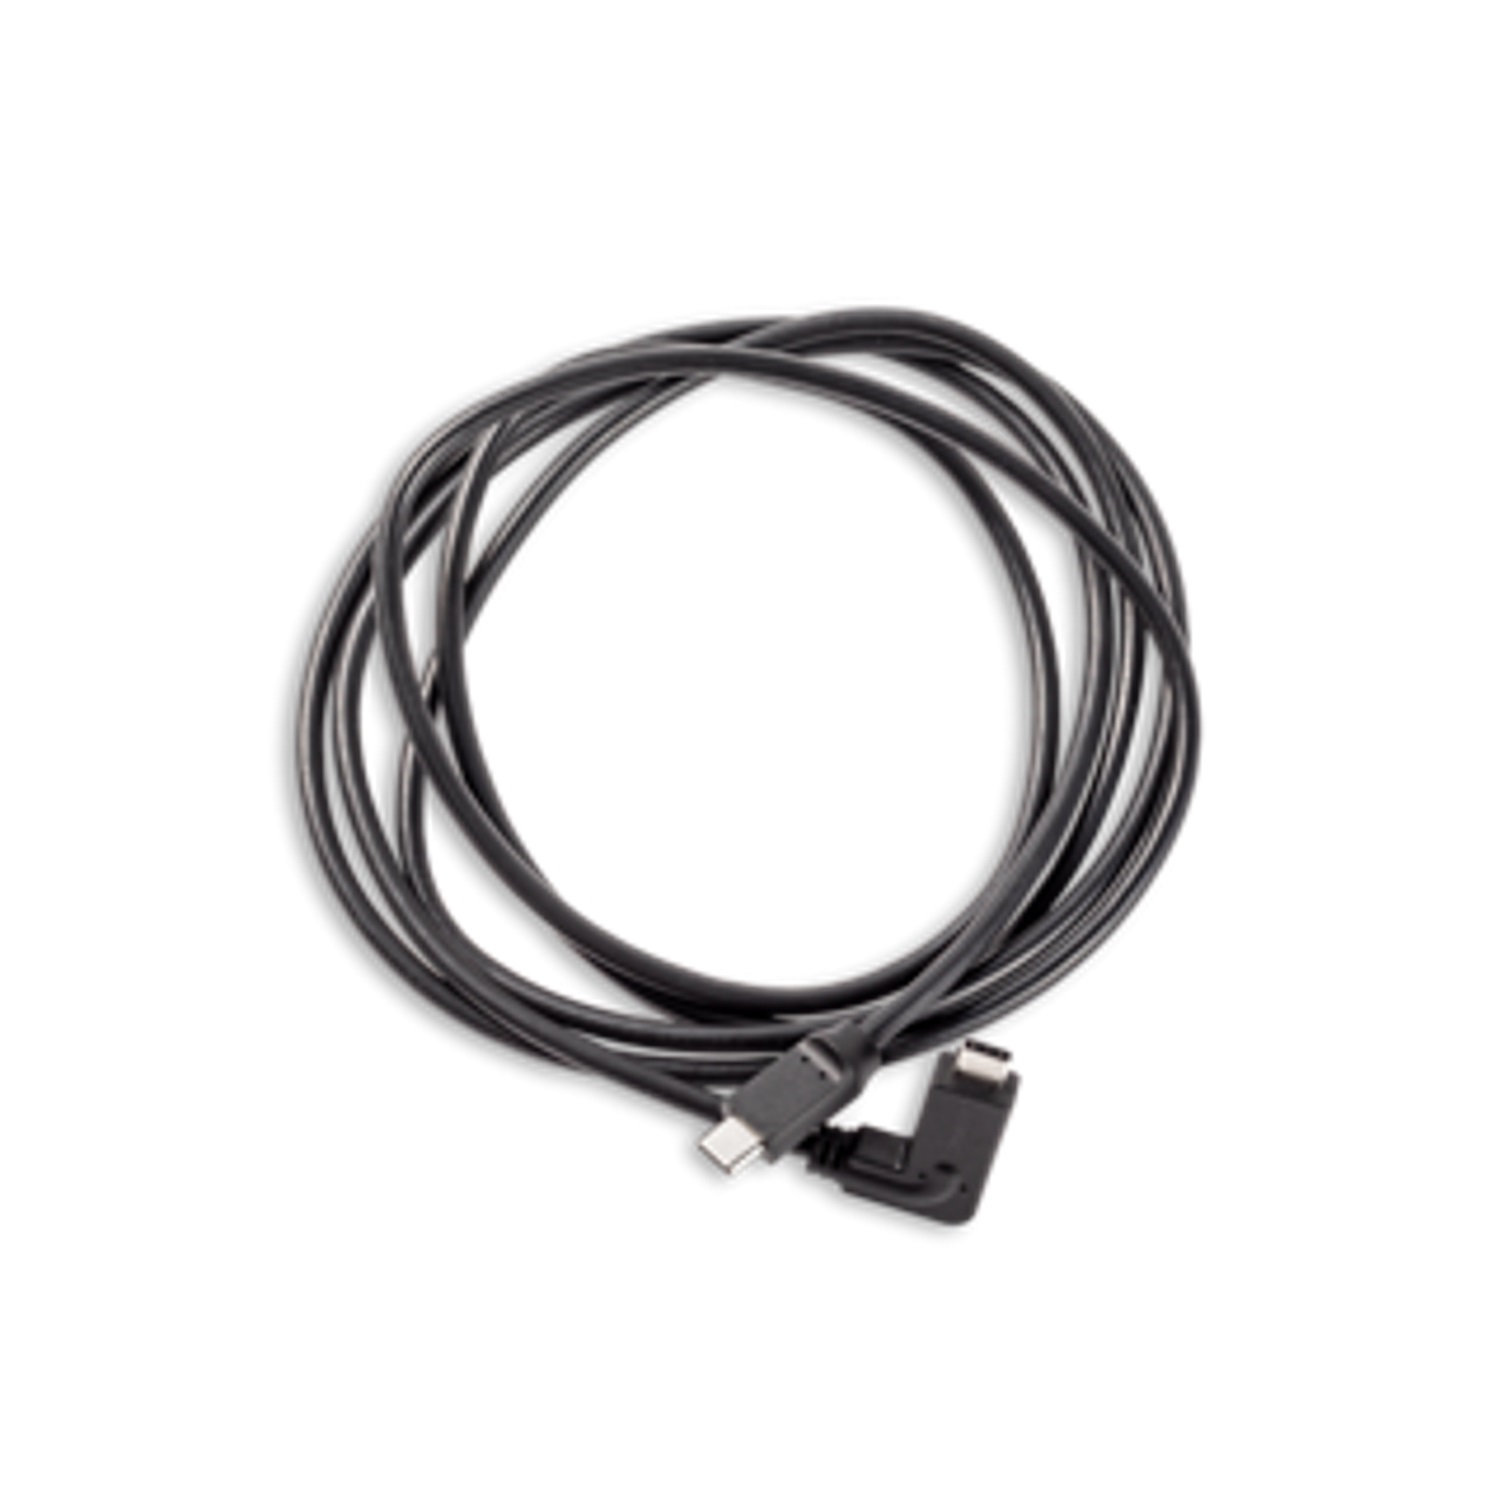 Bose USB 3.1 cable, 2 m